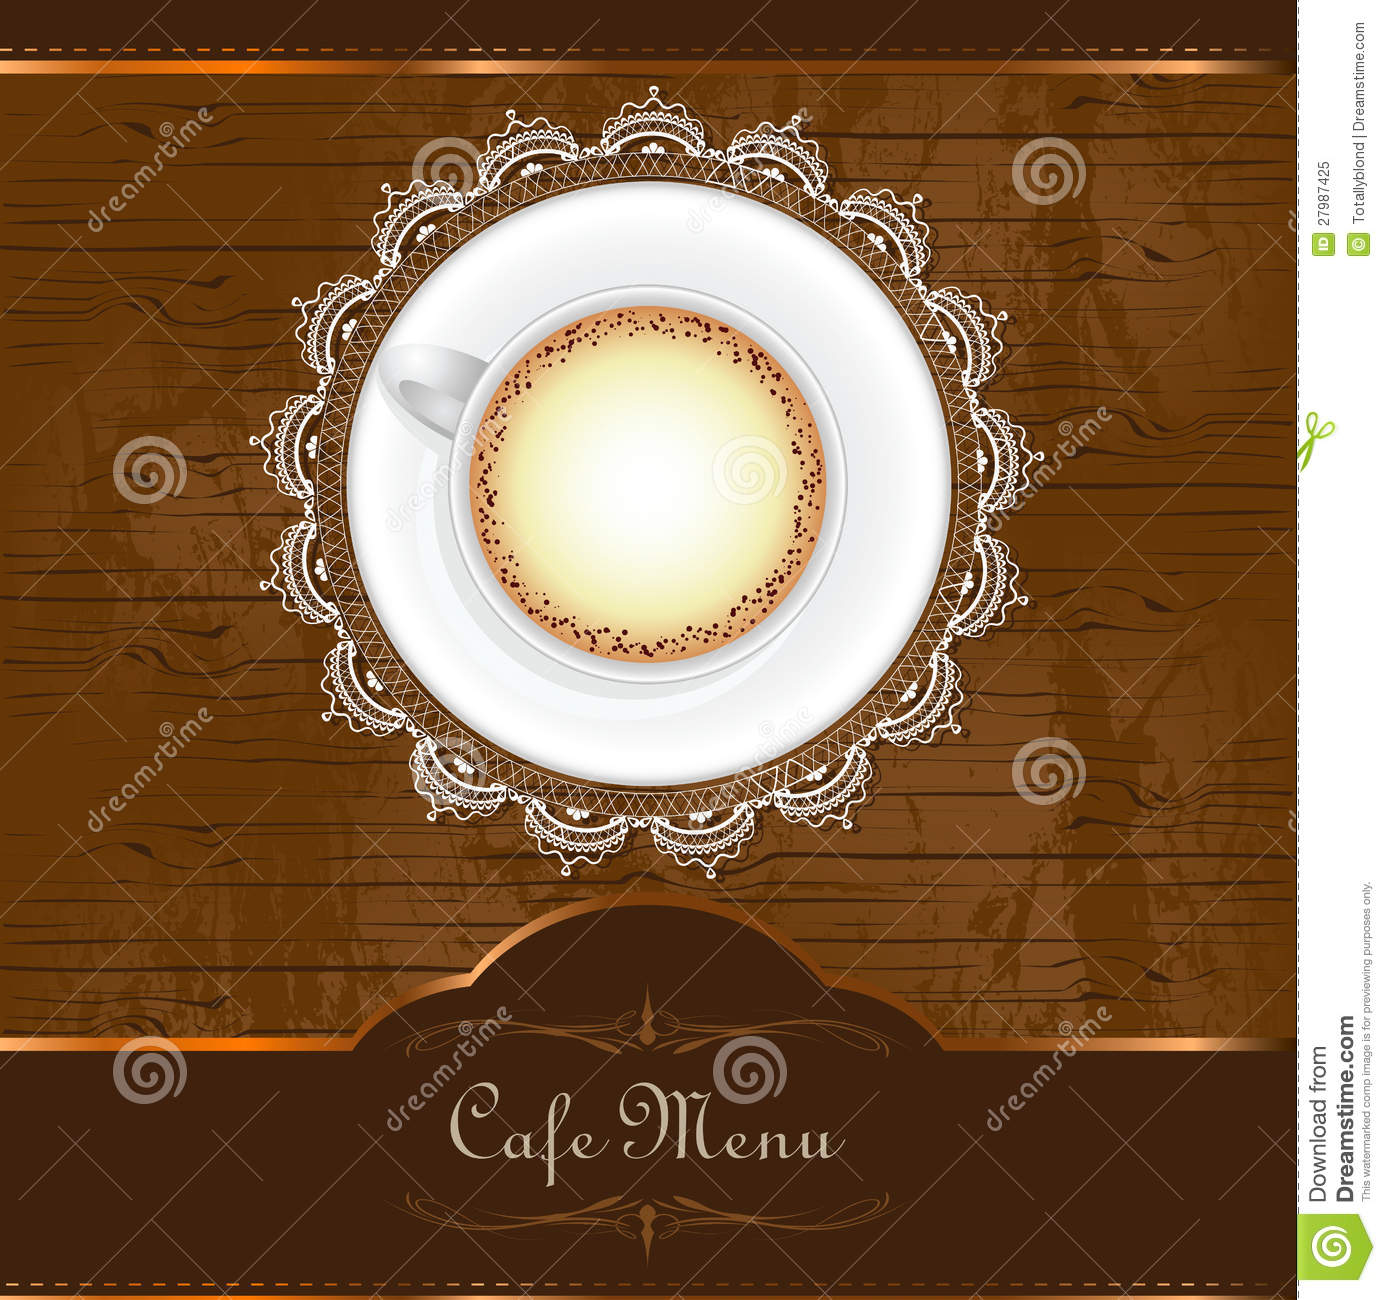 Menu For Restaurant Cafe Bar Coffeehouse Royalty Free Stock Photo